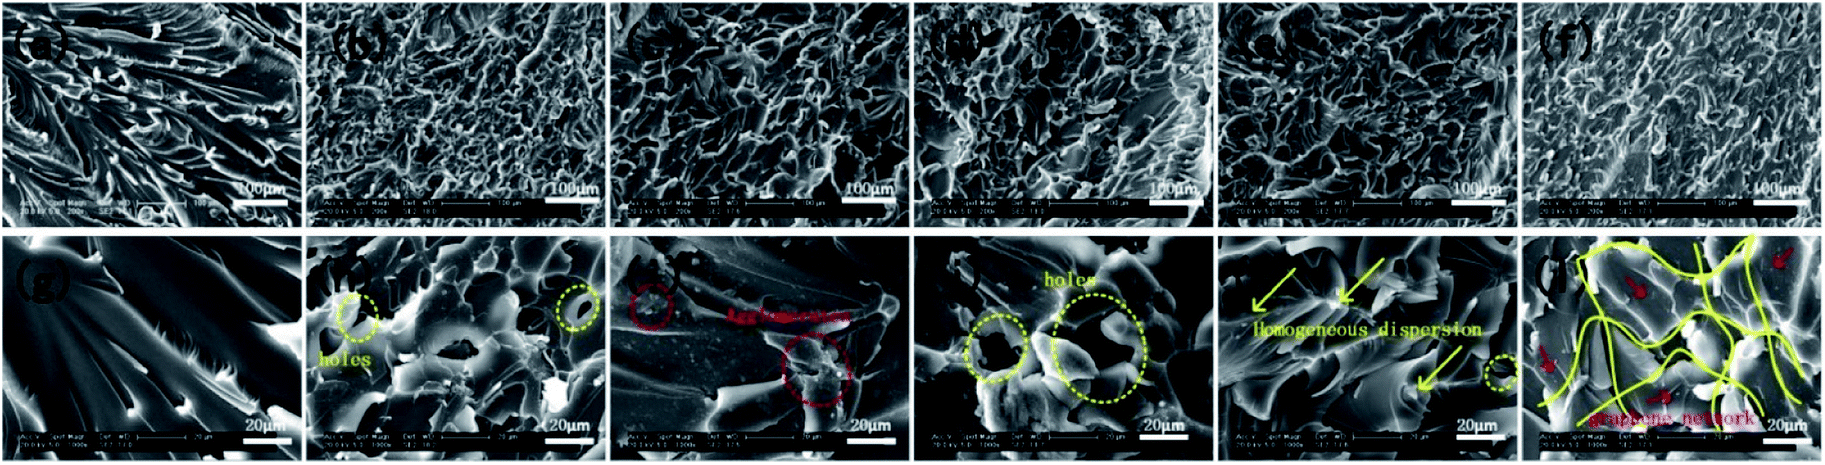 Covalently Functionalized Graphene Oxide Wrapped By Silicon Nitrogen Containing Molecules Preparation And Simultaneous Enhancement Of The Thermal Sta Rsc Advances Rsc Publishing Doi 10 1039 D0raj